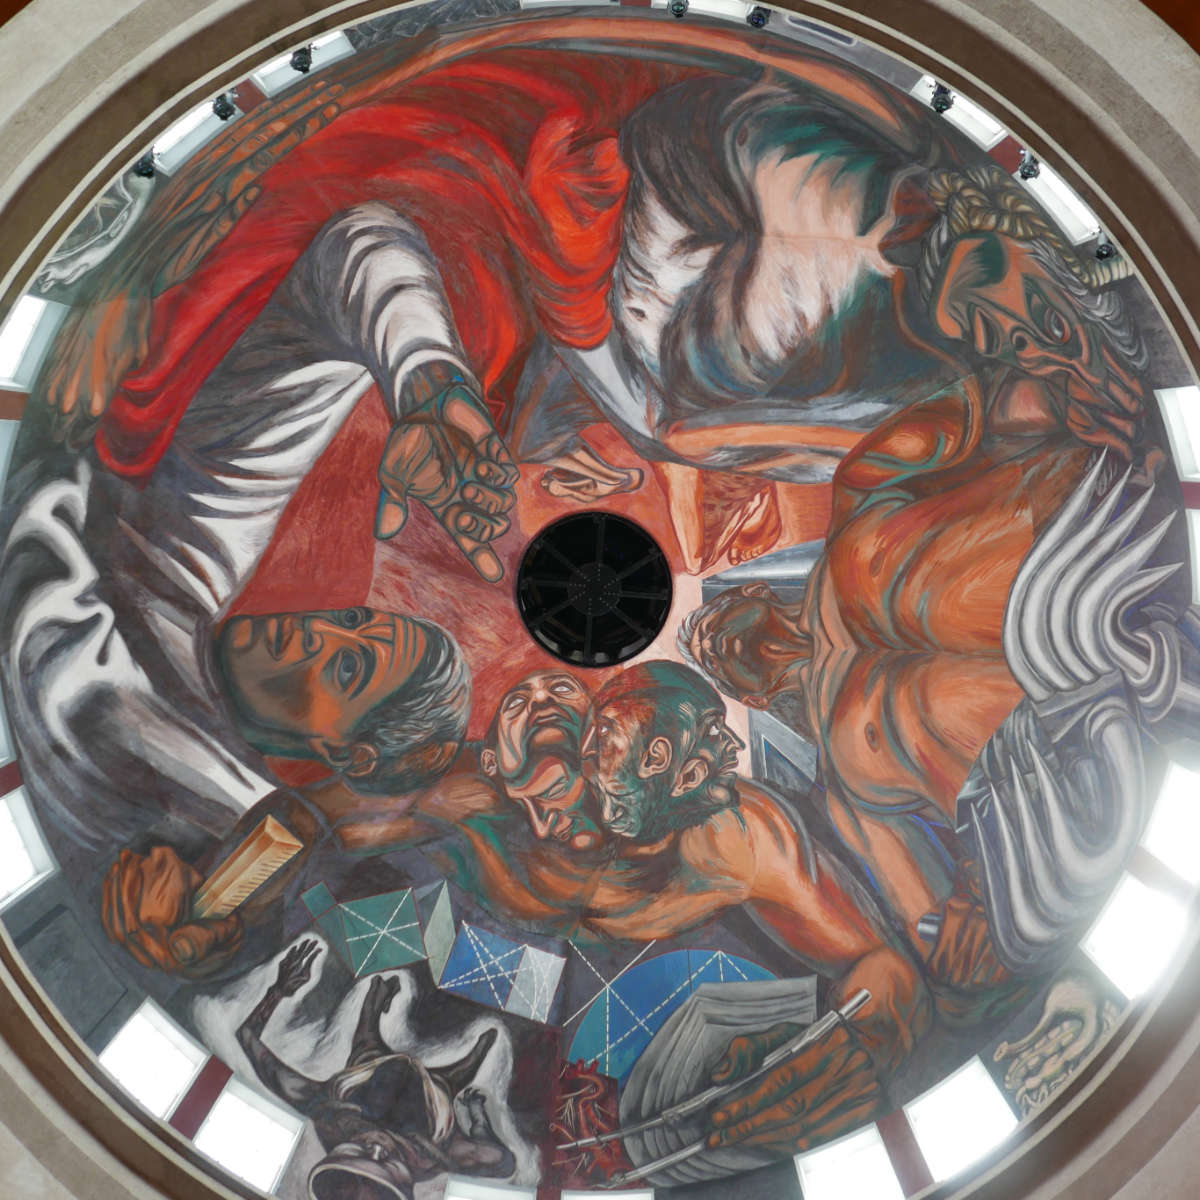 Orozco murals in Guadalajara: Shock and awe - Into The Arms Of America